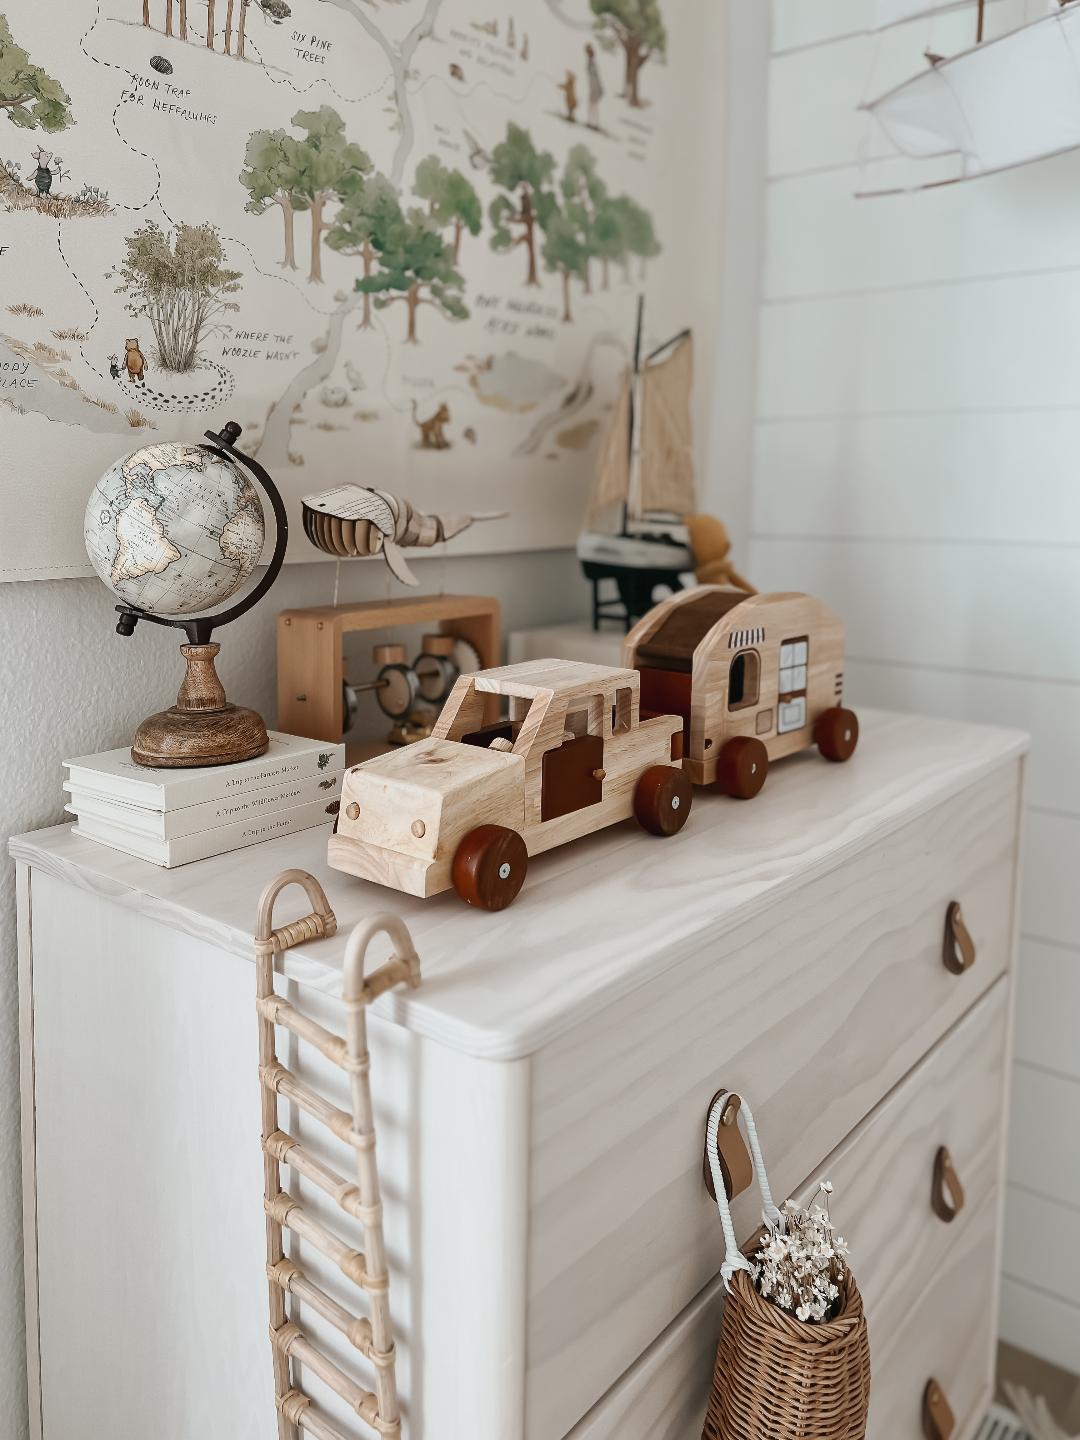 Car and Camper Wooden Toy Set